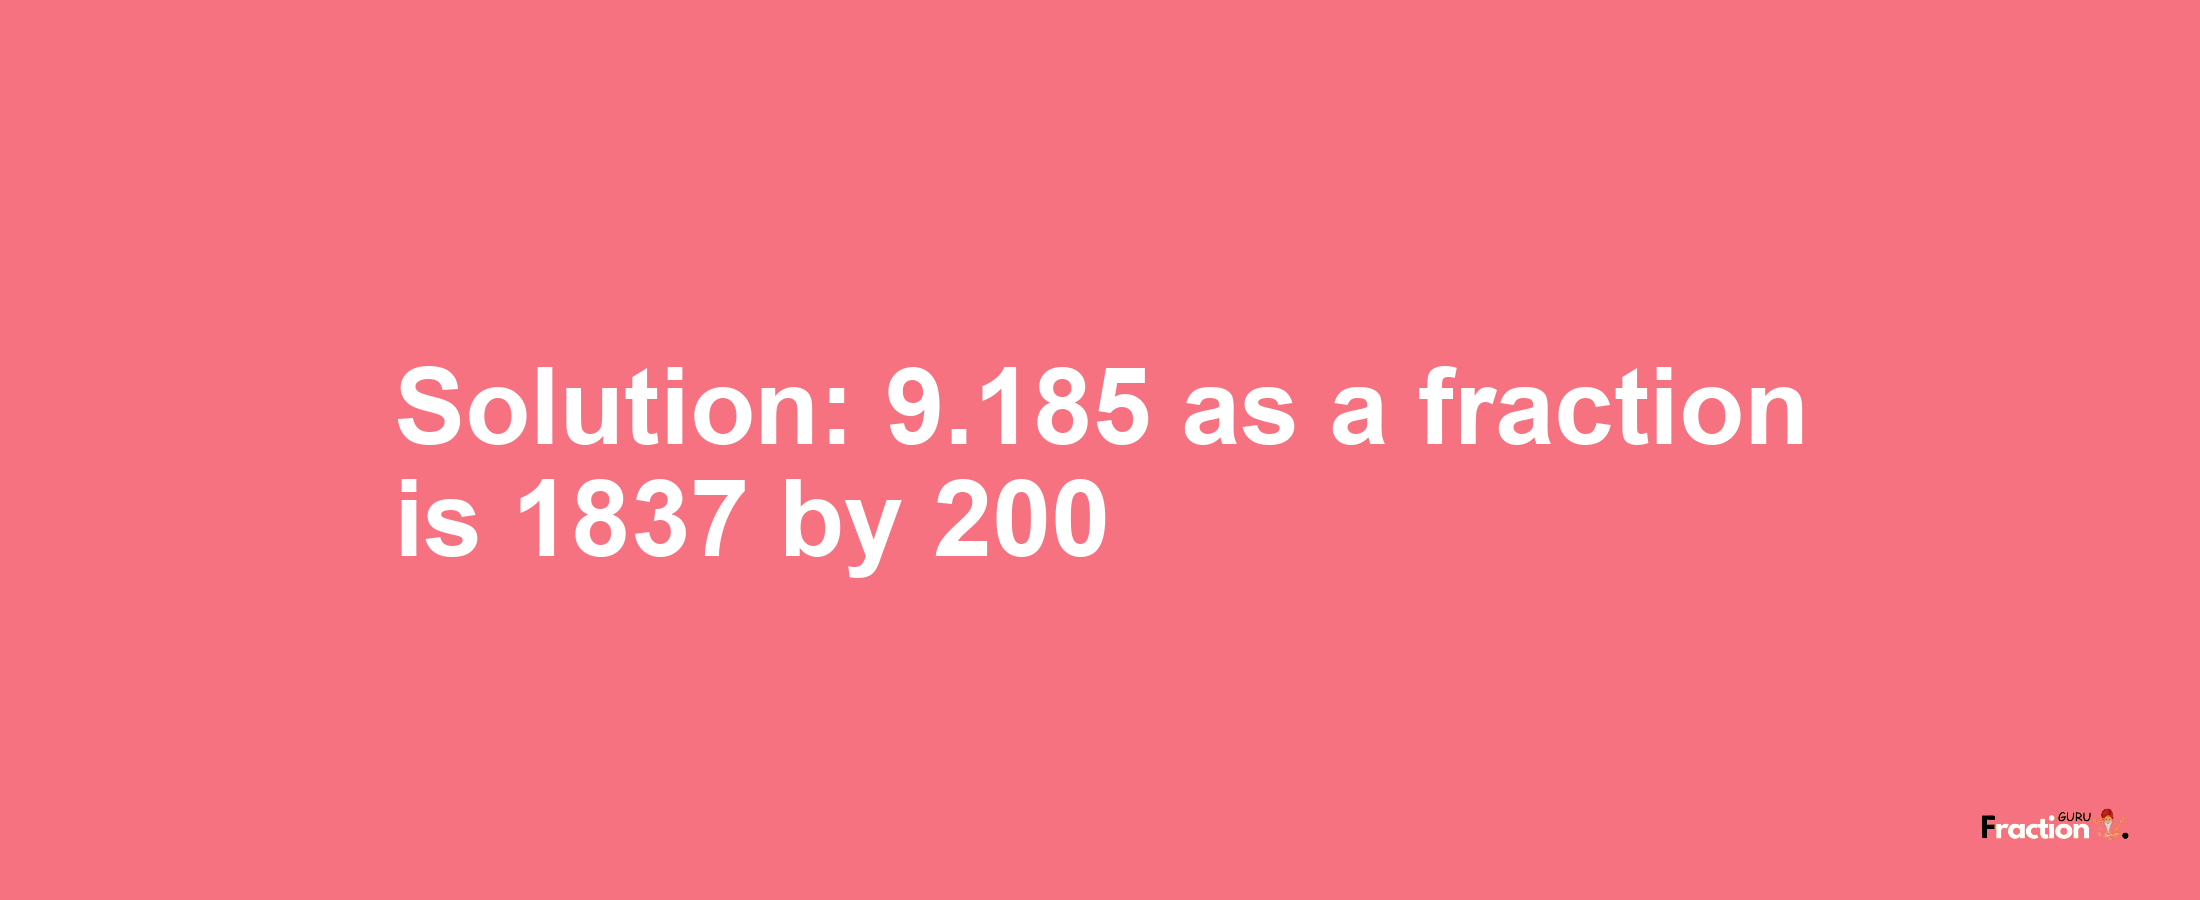 Solution:9.185 as a fraction is 1837/200